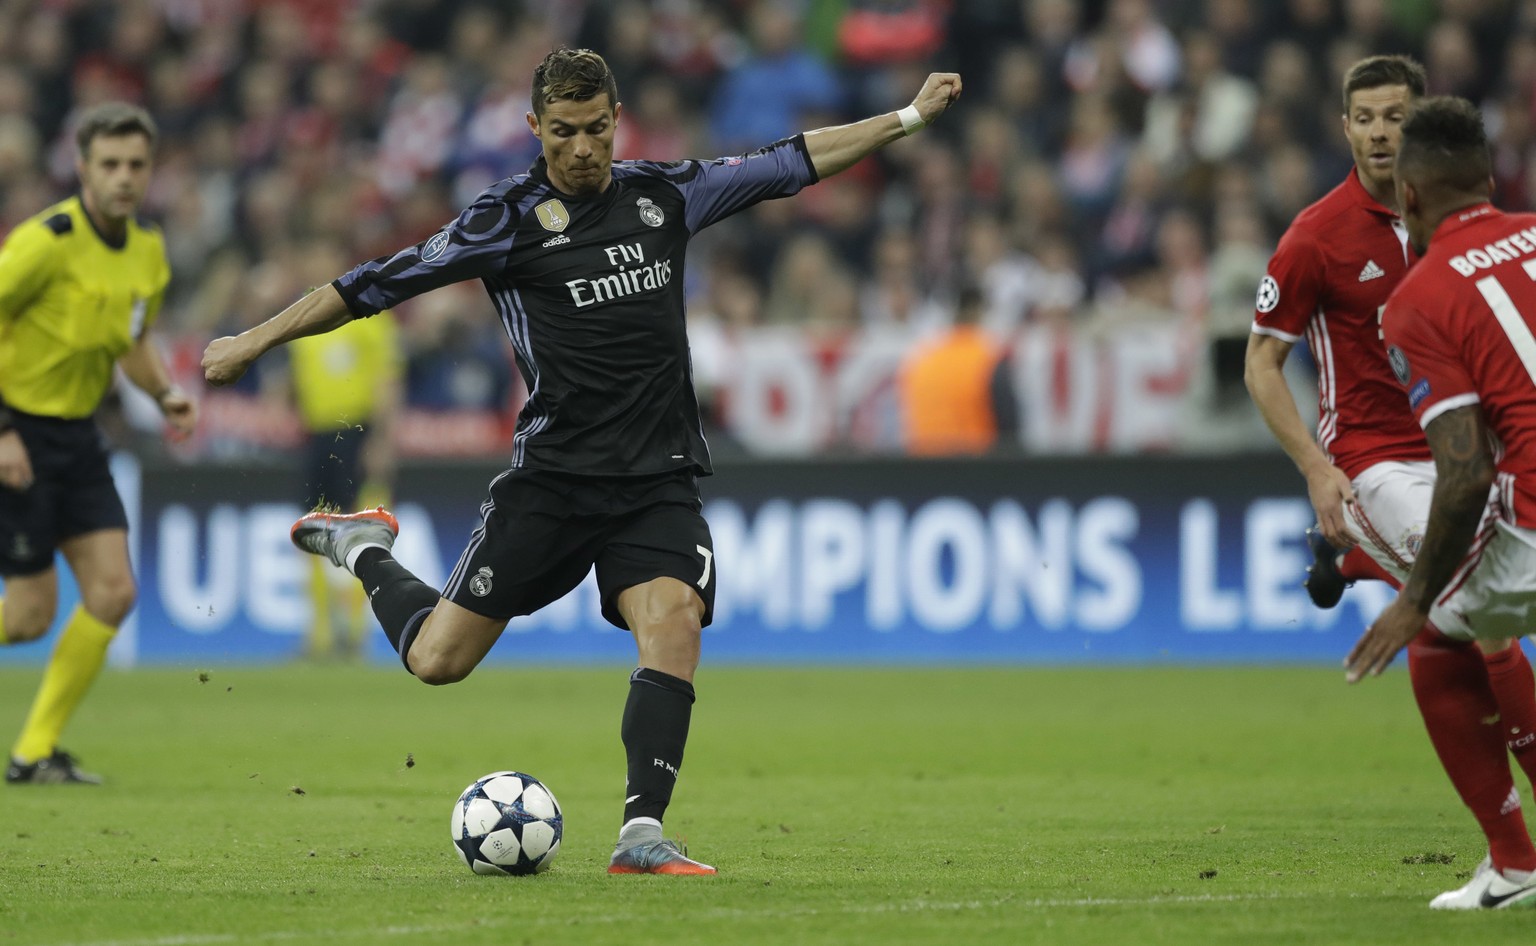 Real Madrid&#039;s Cristiano Ronaldo kicks the ball during the Champions League quarterfinal first leg soccer match between FC Bayern Munich and Real Madrid, in Munich, Germany, Wednesday, April 12, 2 ...